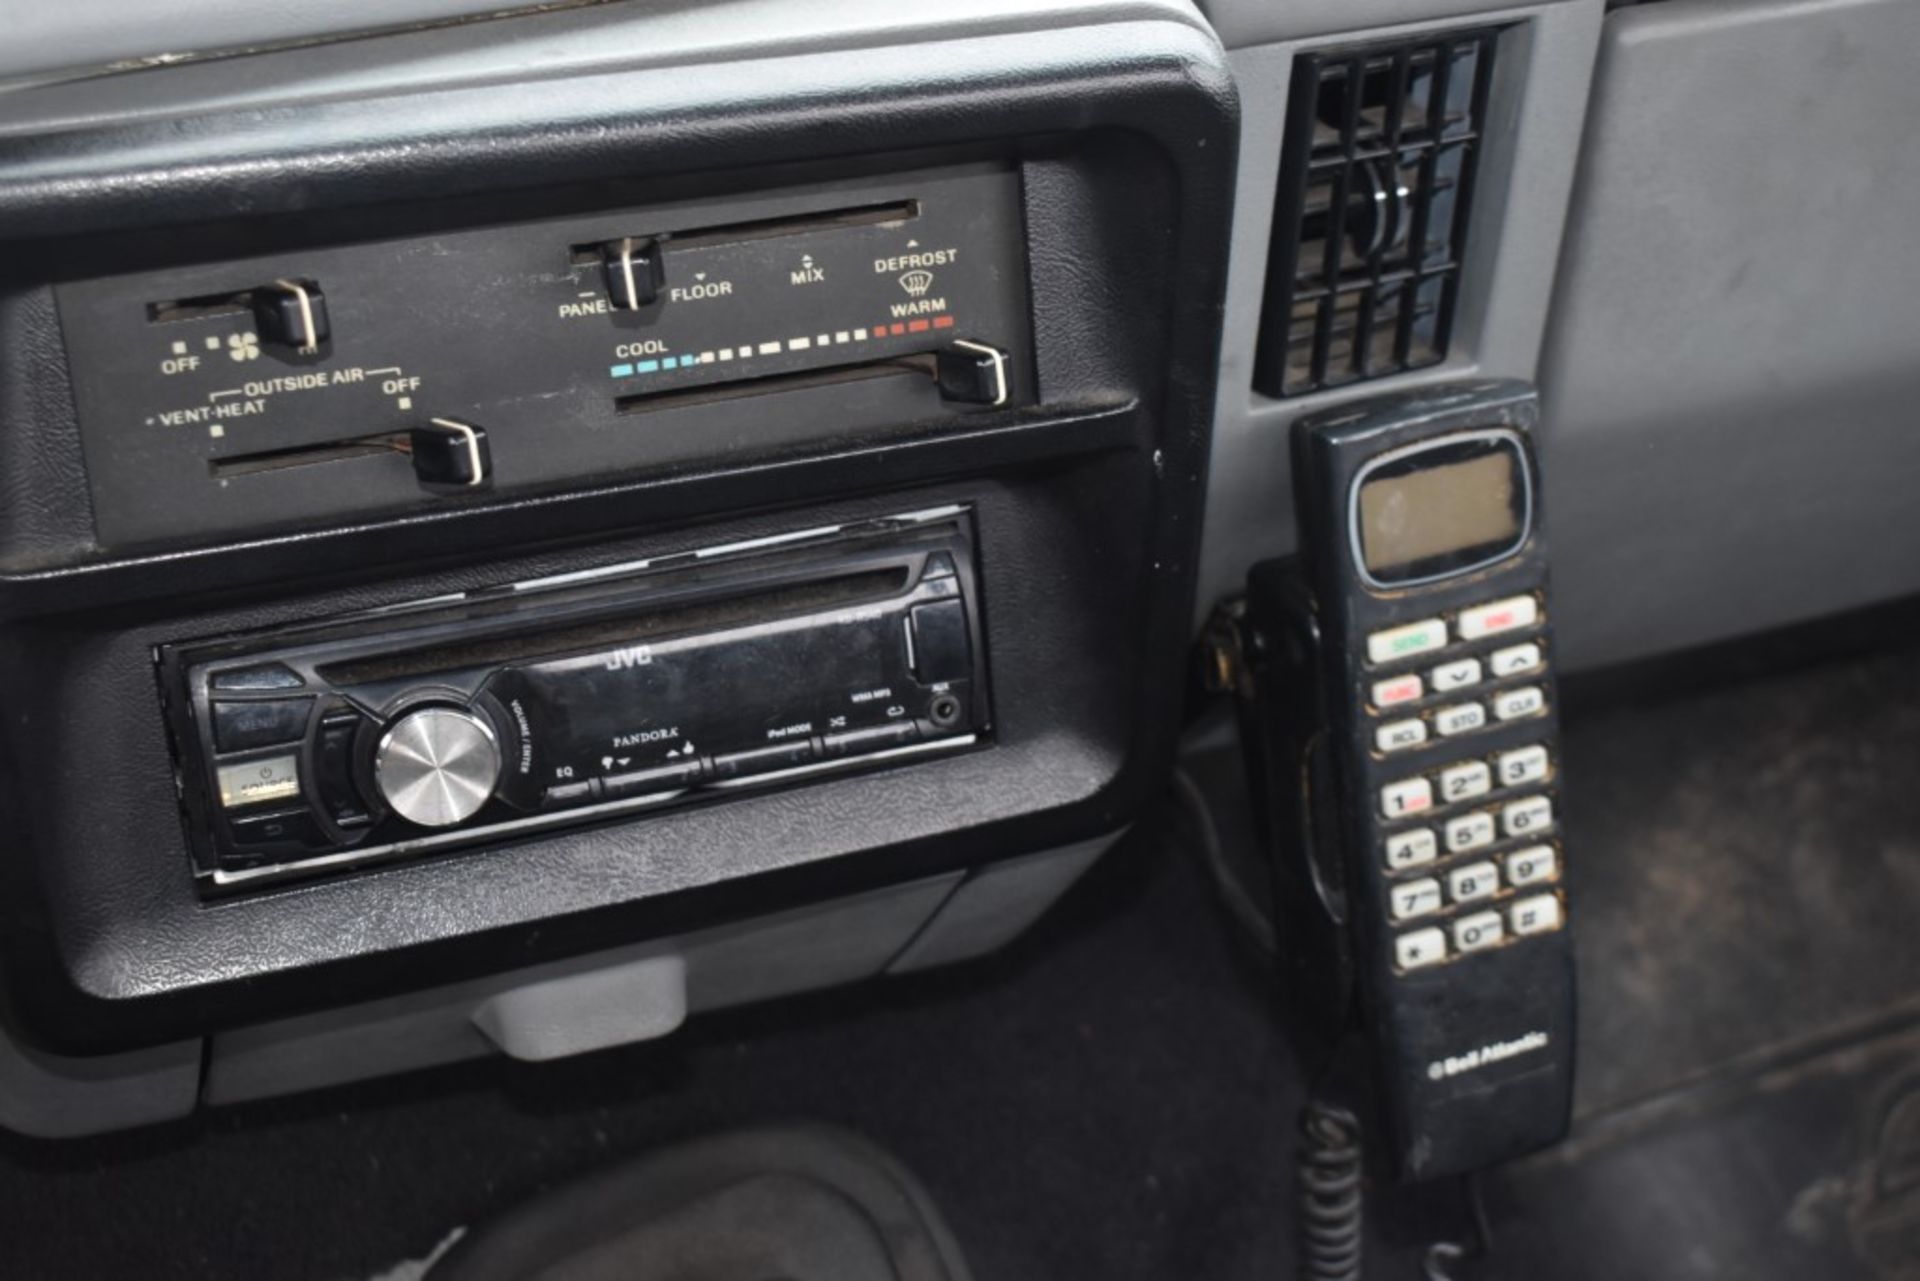 1987 Ford F-150 Truck - Image 36 of 36